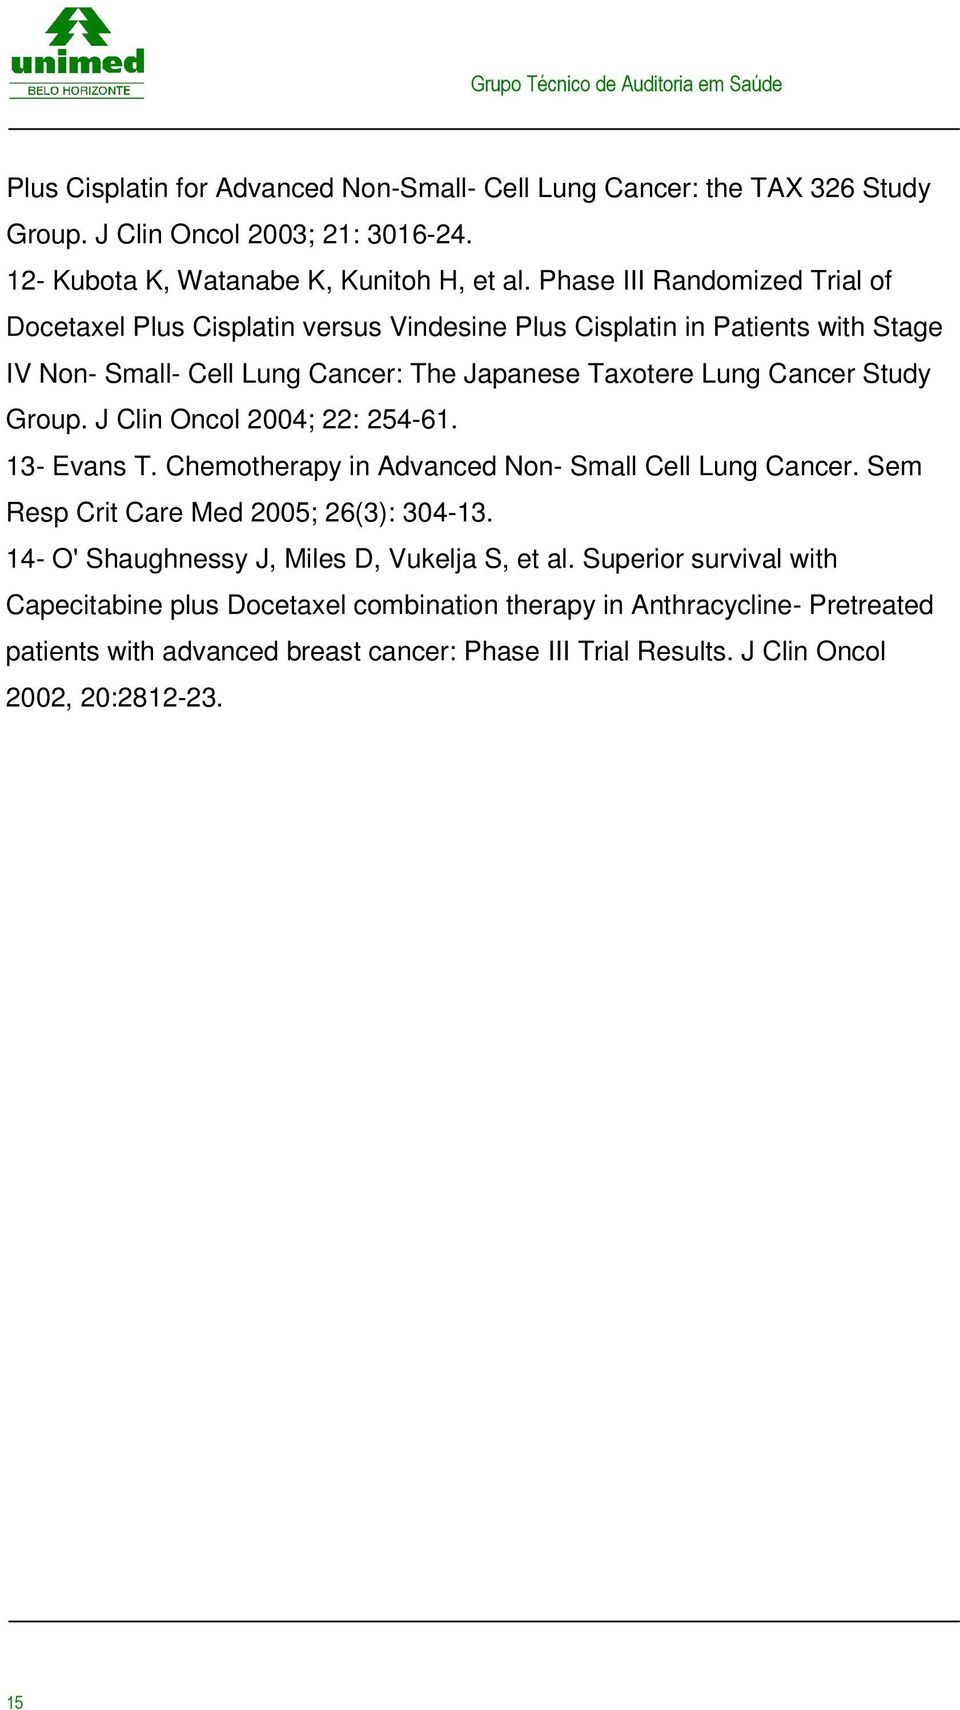 2004; 22: 254-61 13- Evans T Chemotherapy in Advanced Non- Small Cell Lung Cancer Sem Resp Crit Care Med 2005; 26(3): 304-13 14- O' Shaughnessy J, Miles D, Vukelja S, et al